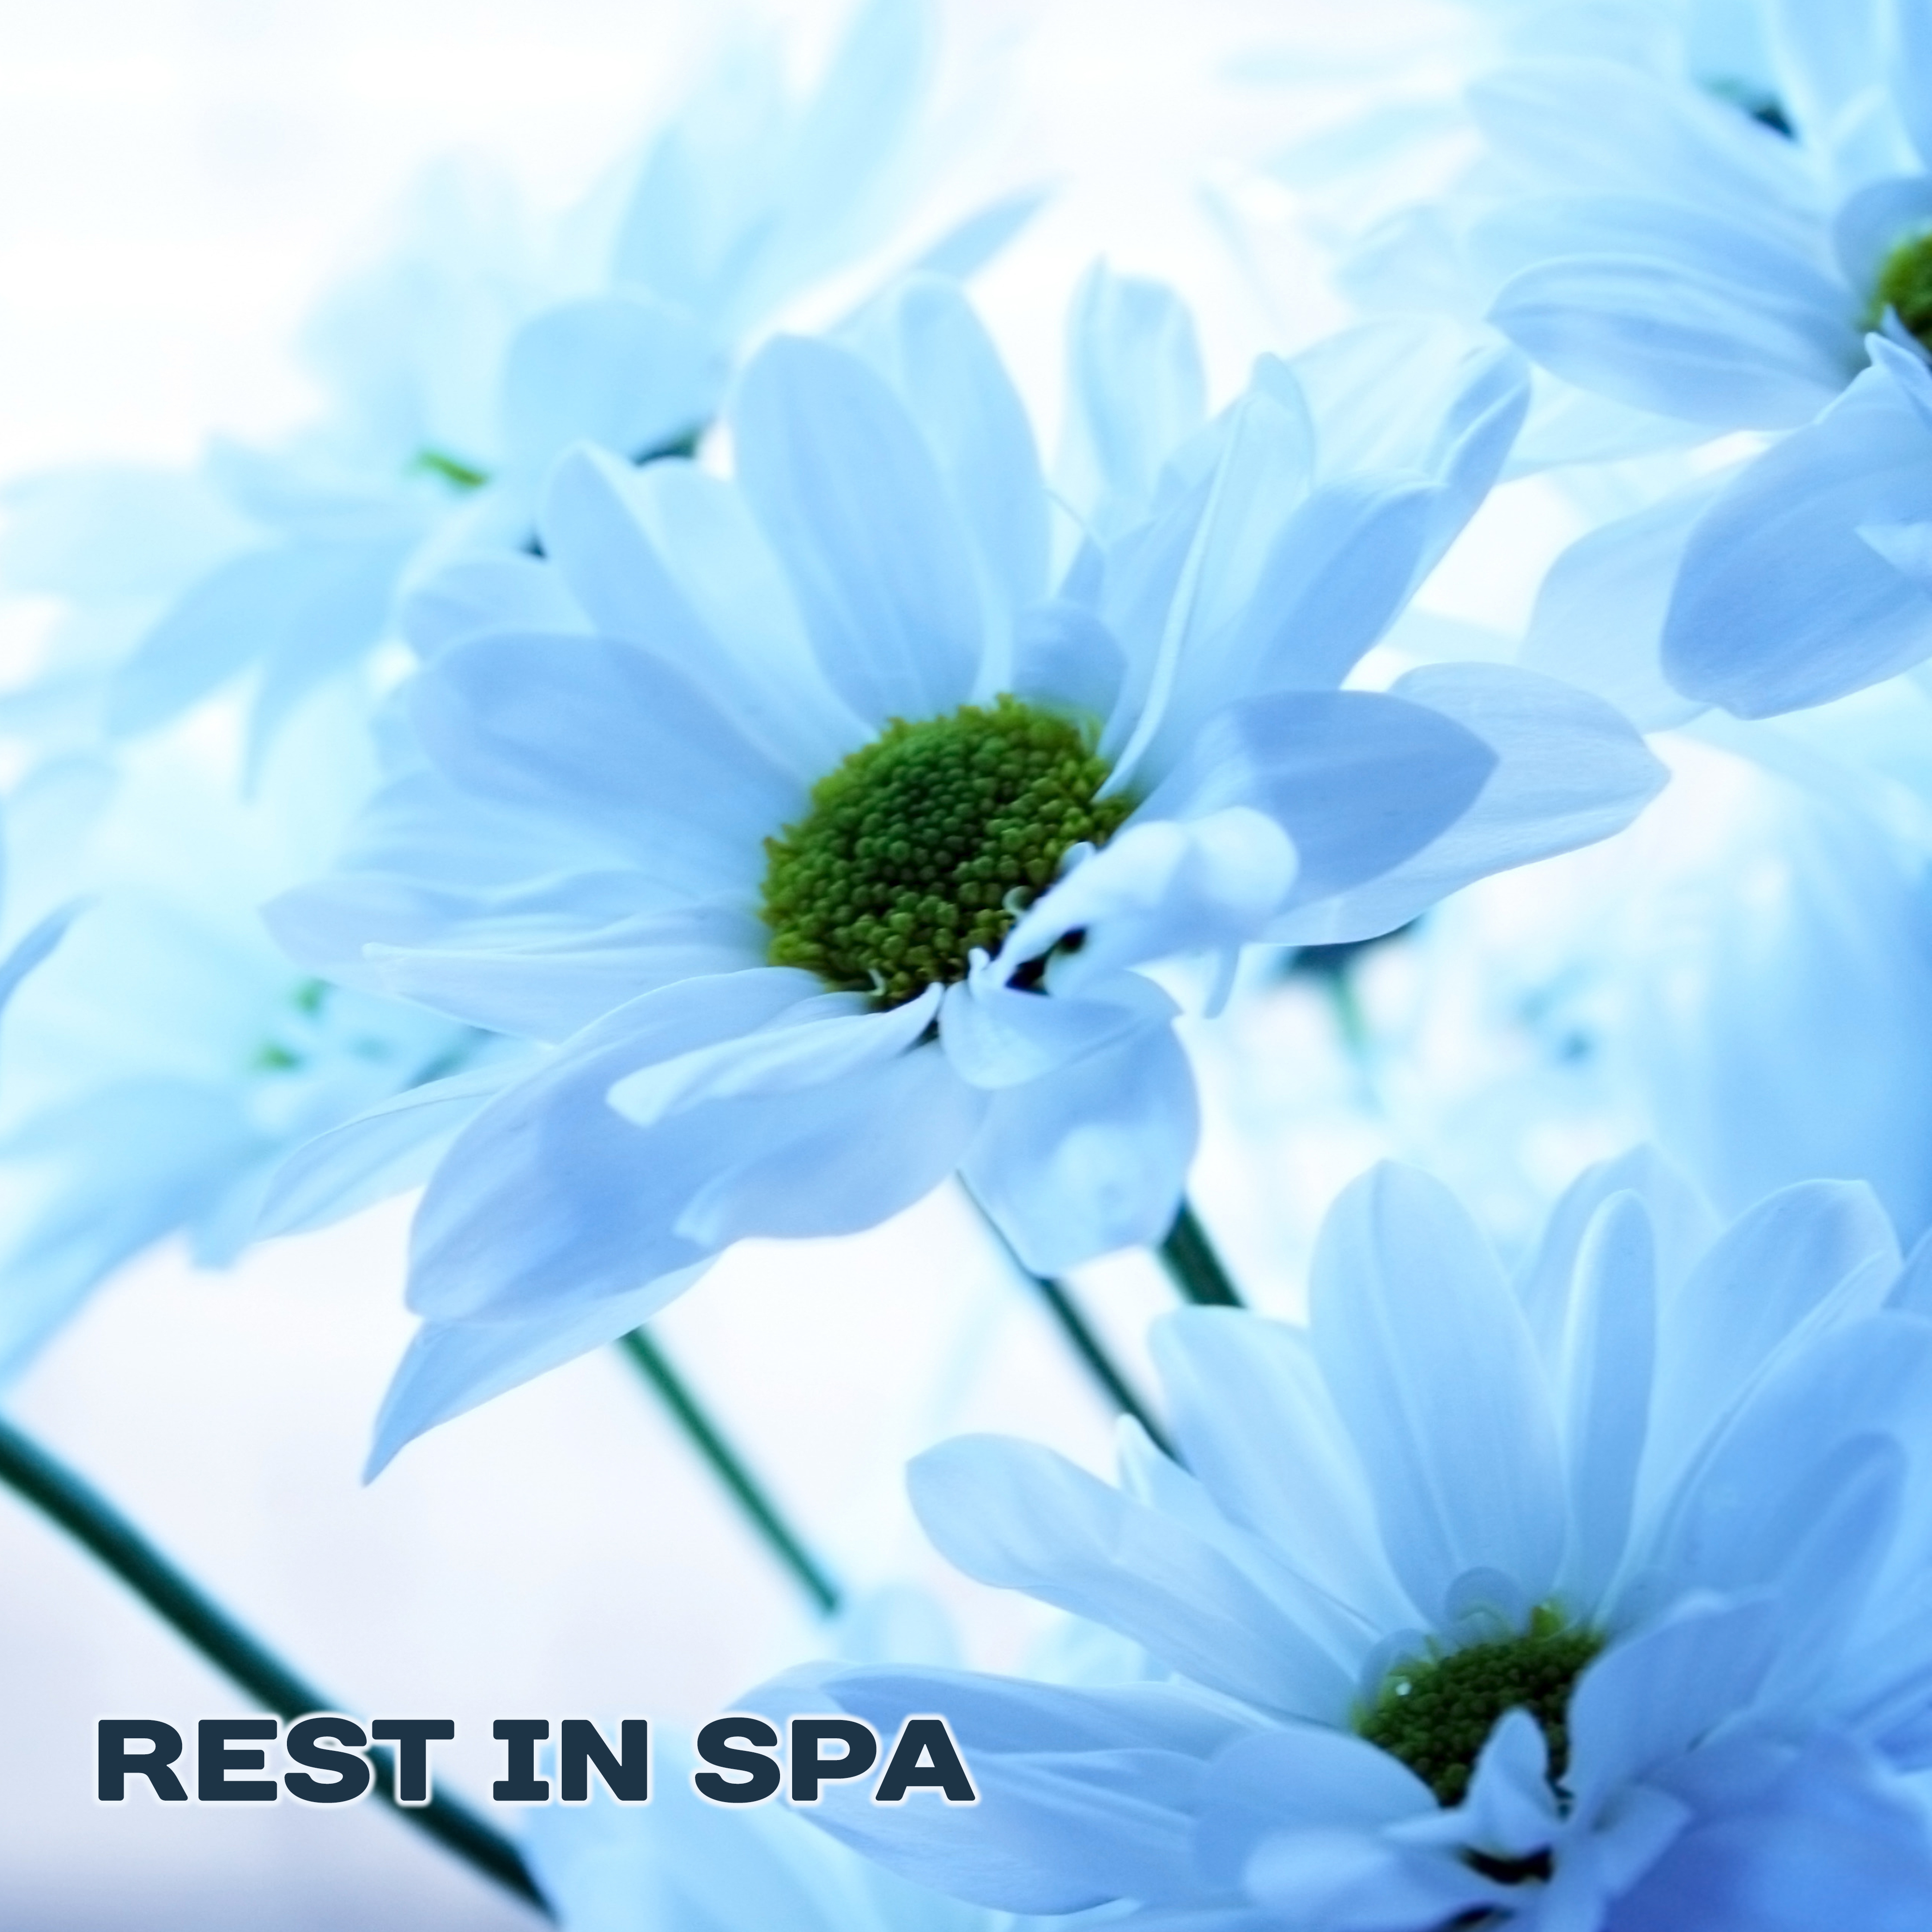 Rest in Spa – Calm New Age Music, Relaxation in Quiet Place, Chilled Melodies, Spiritual Rest